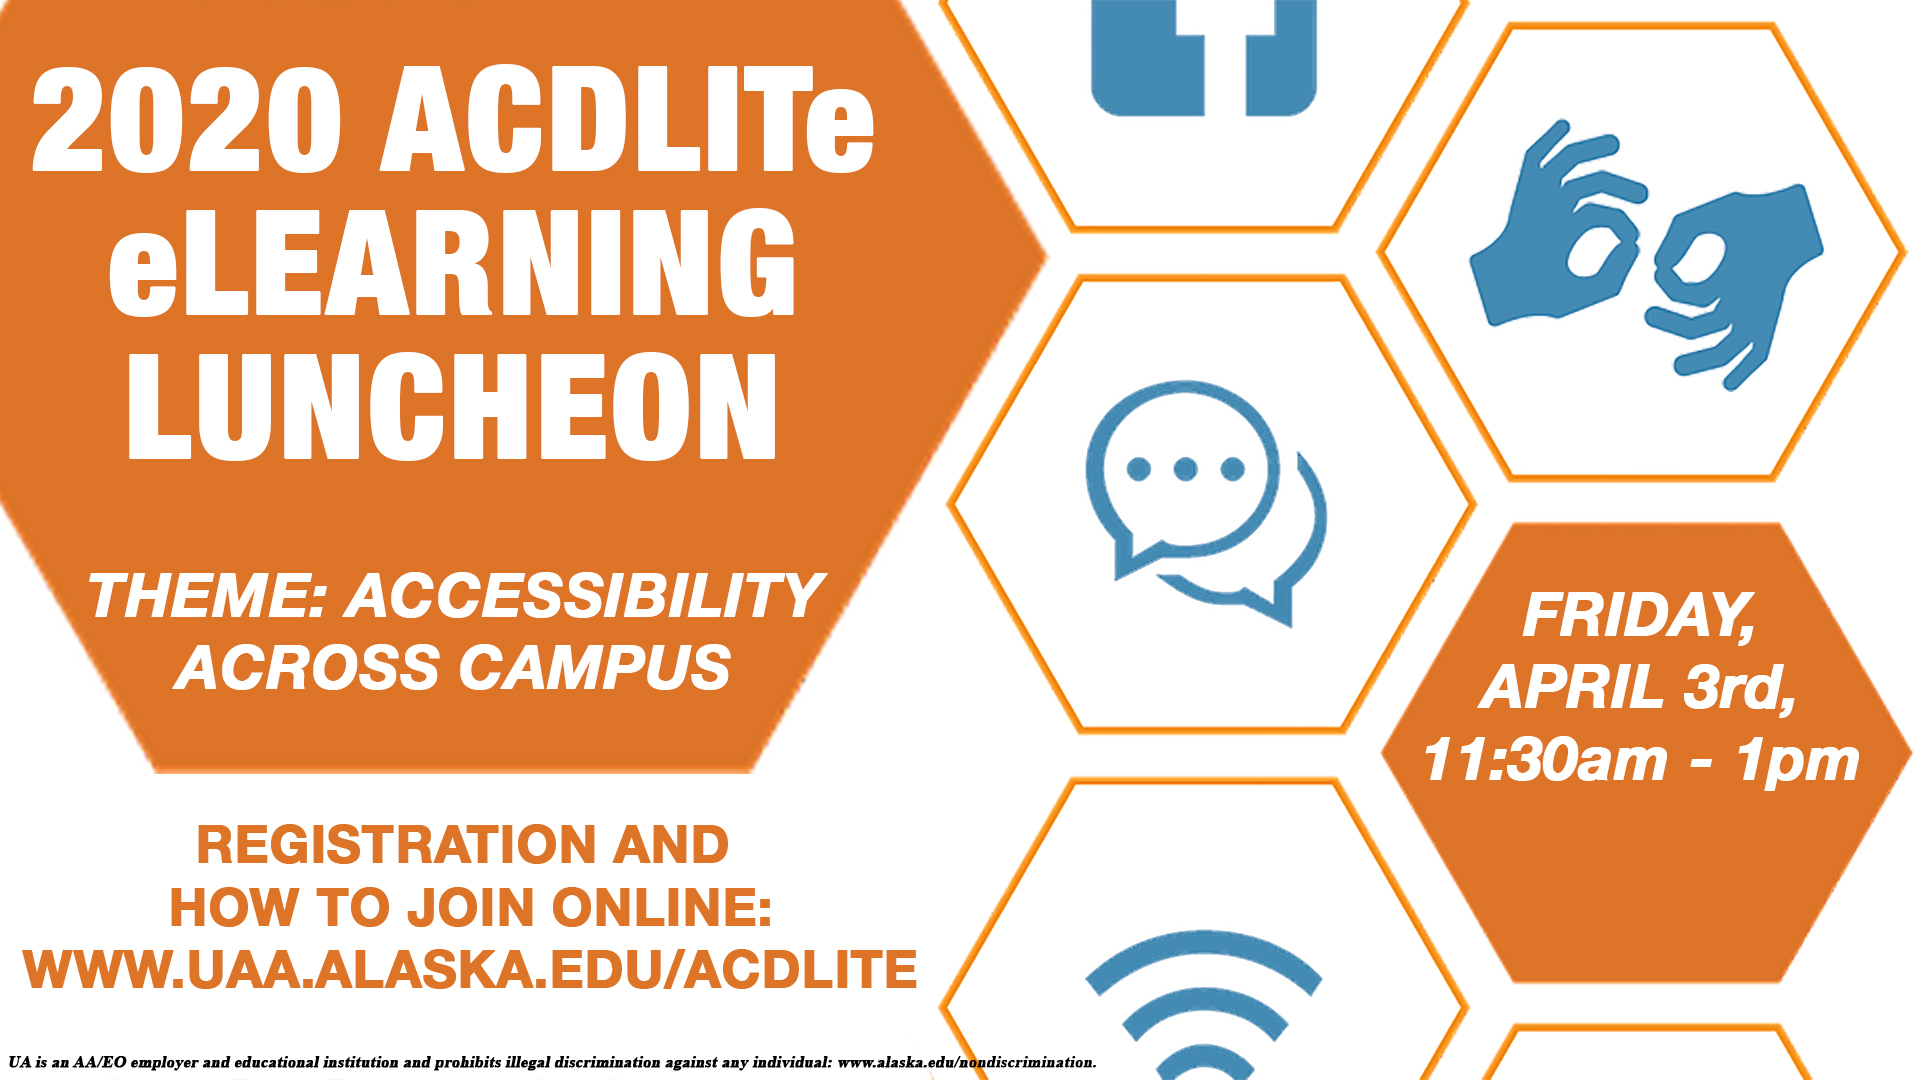 2020 ACDLITe eLearning Luncheon, Theme: Accessibility Across Campus, Friday, April 3rd, 11:30am - 1pm, Registration and how to join online: www.uaa.alaska.edu/acdlite